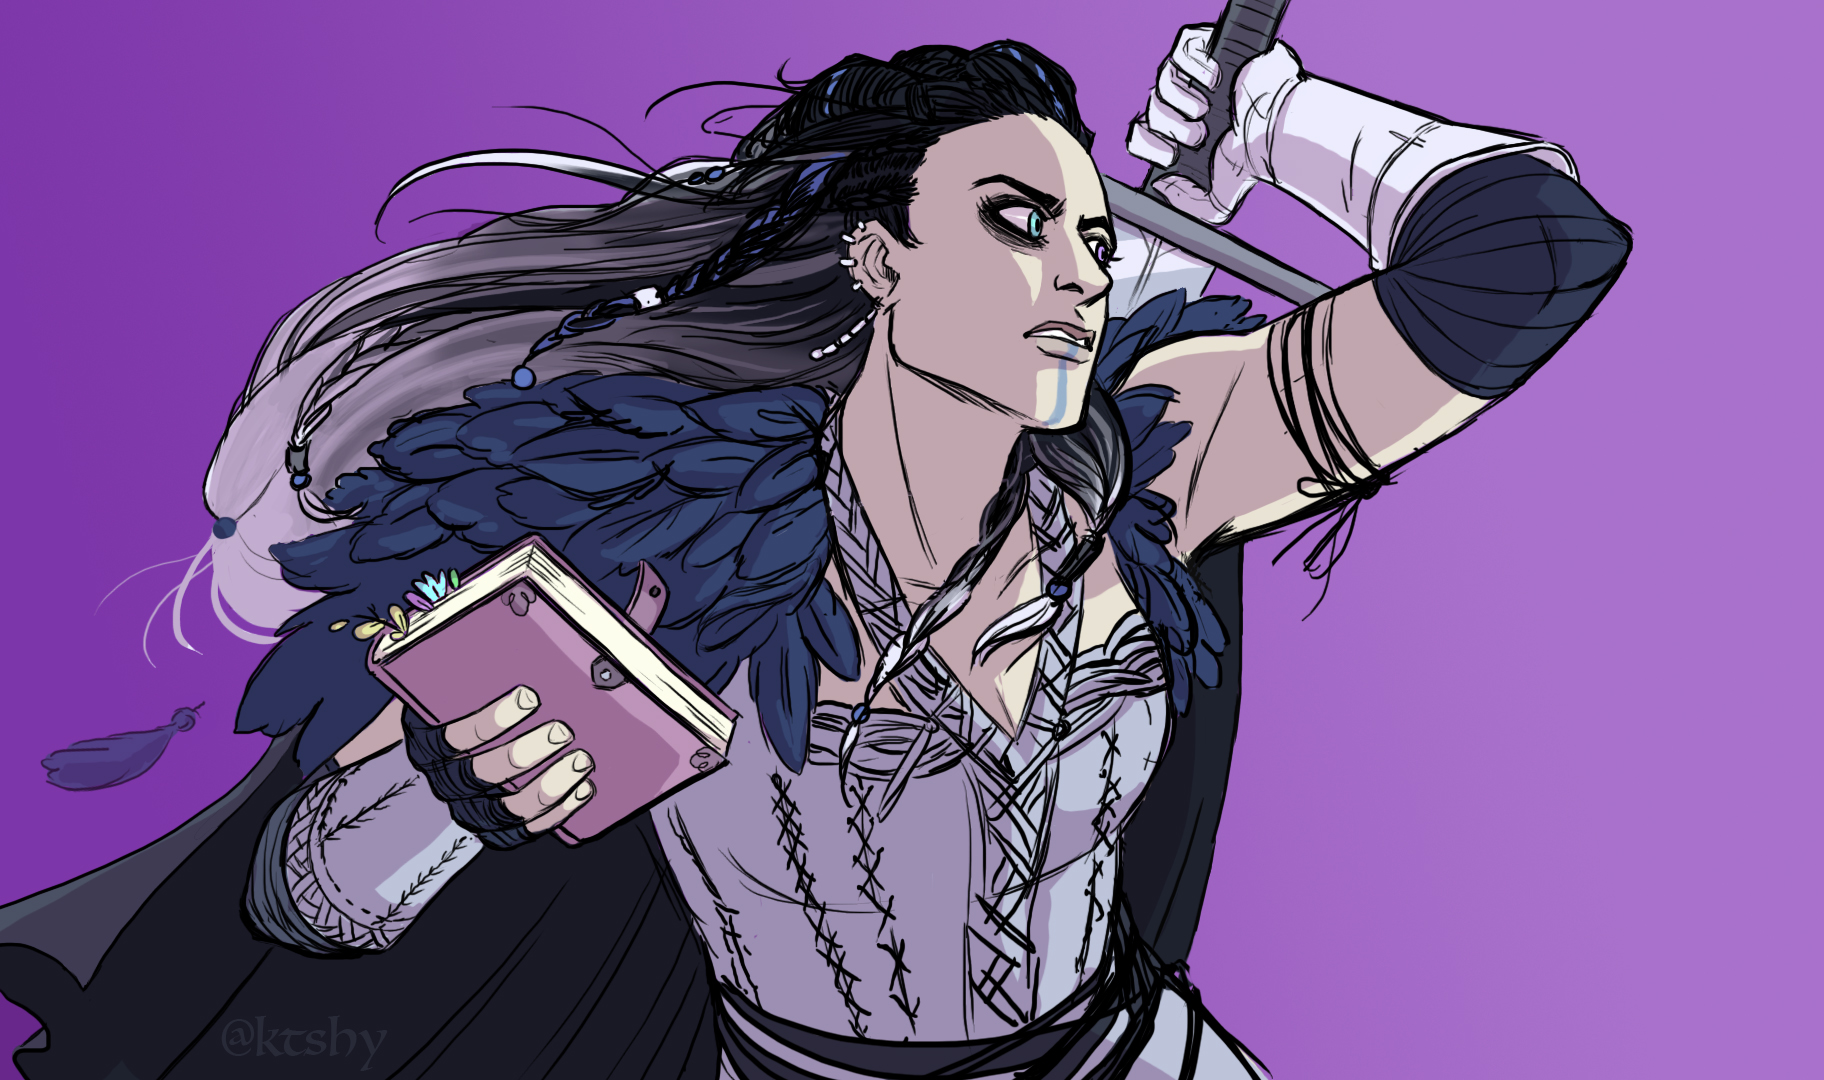  Yasha from Critical Role. 